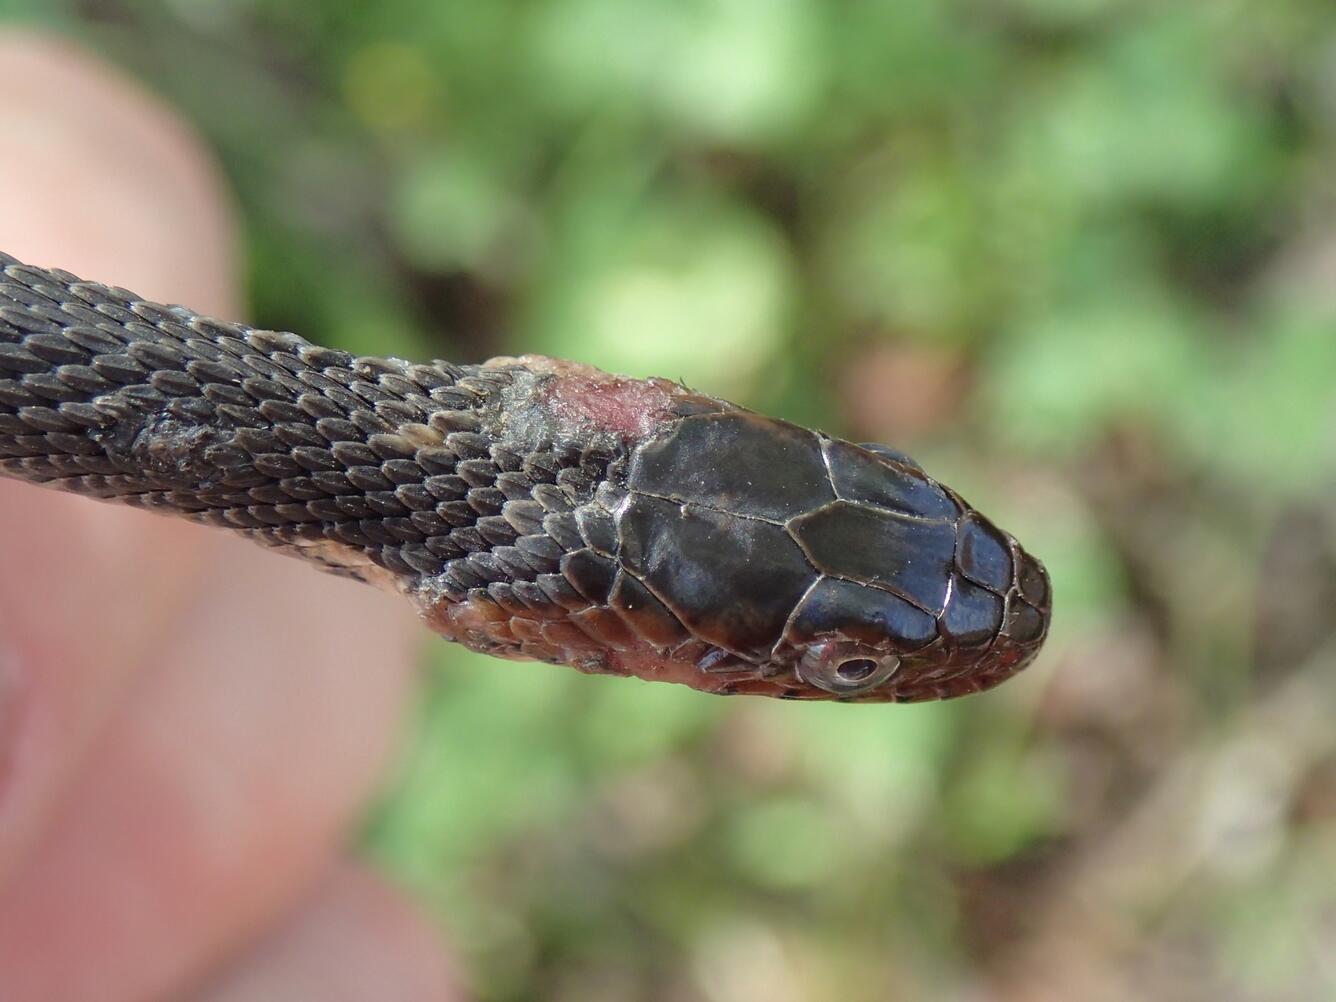 Juvenile Broad-banded Watersnake with SFD